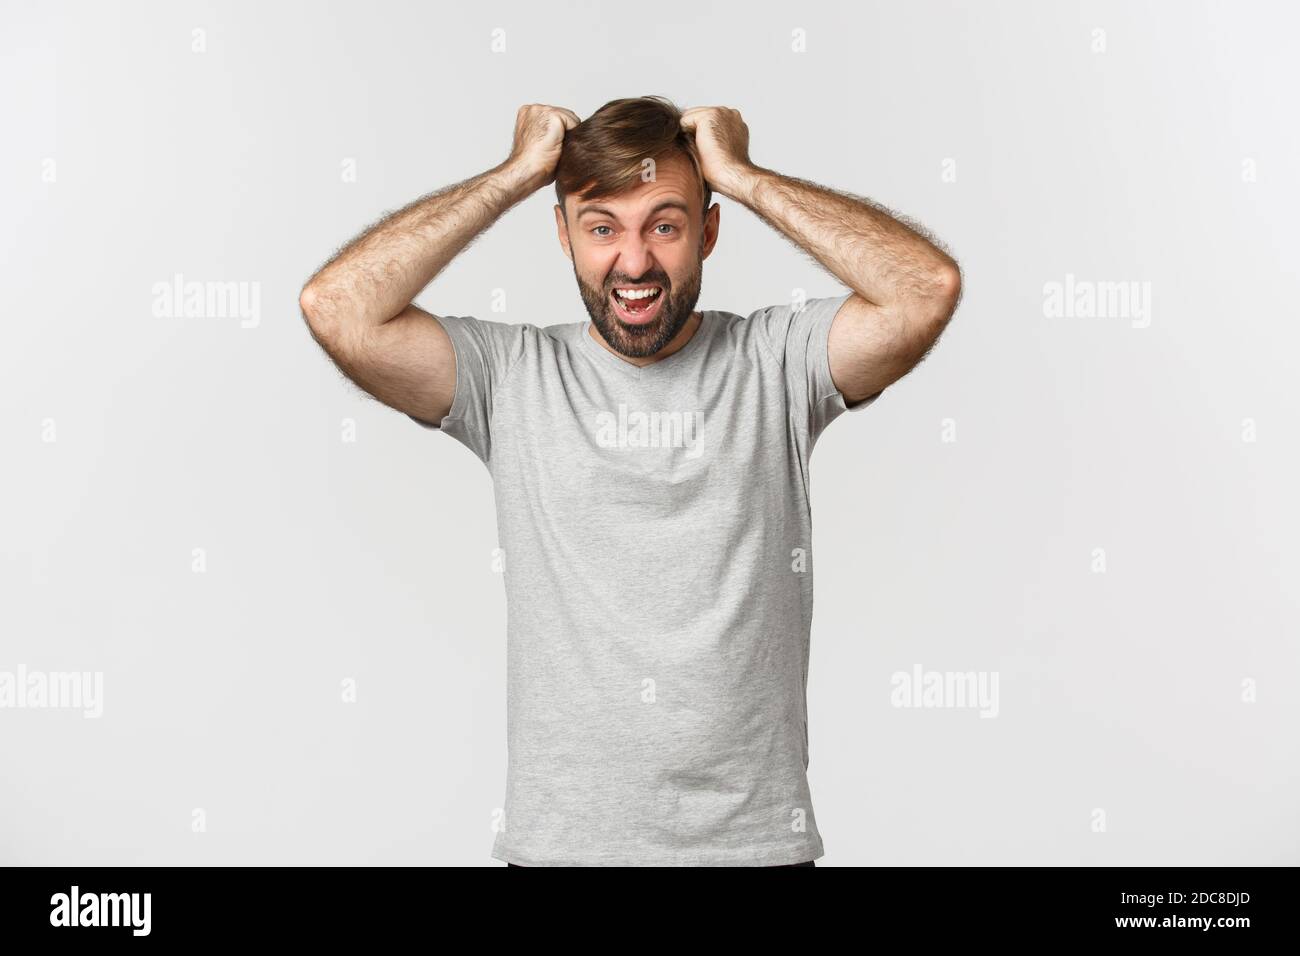 Portrait of distressed mad guy in gray t-shirt, ripping hair from anger and shouting, standing over white background Stock Photo